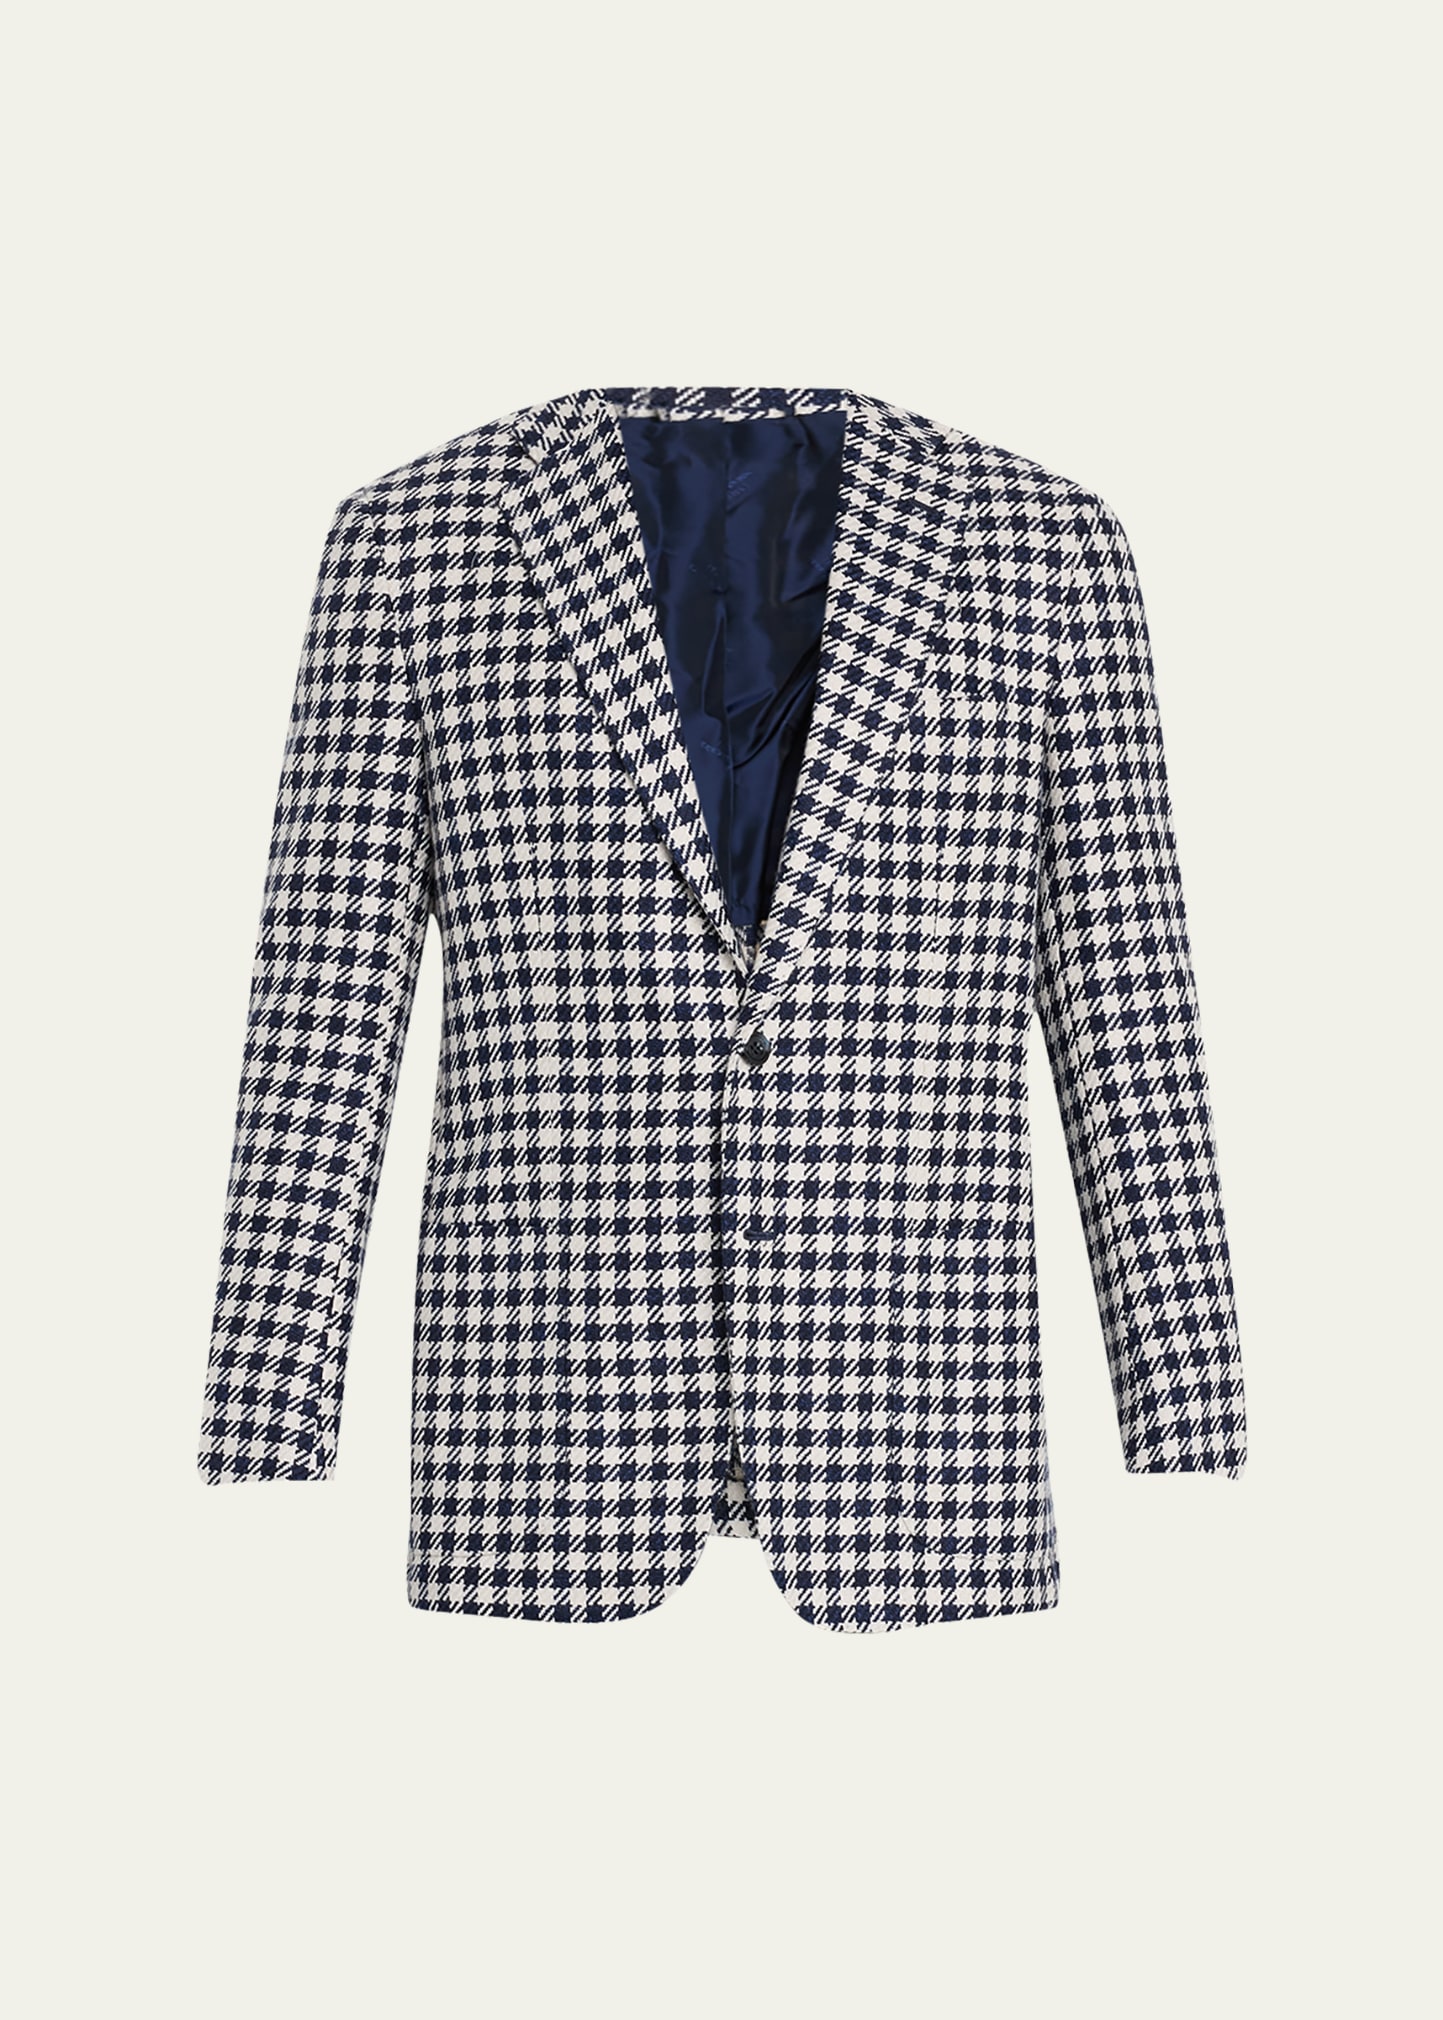 Kiton Men's Houndstooth Check Two-button Sport Coat In Navy Mult